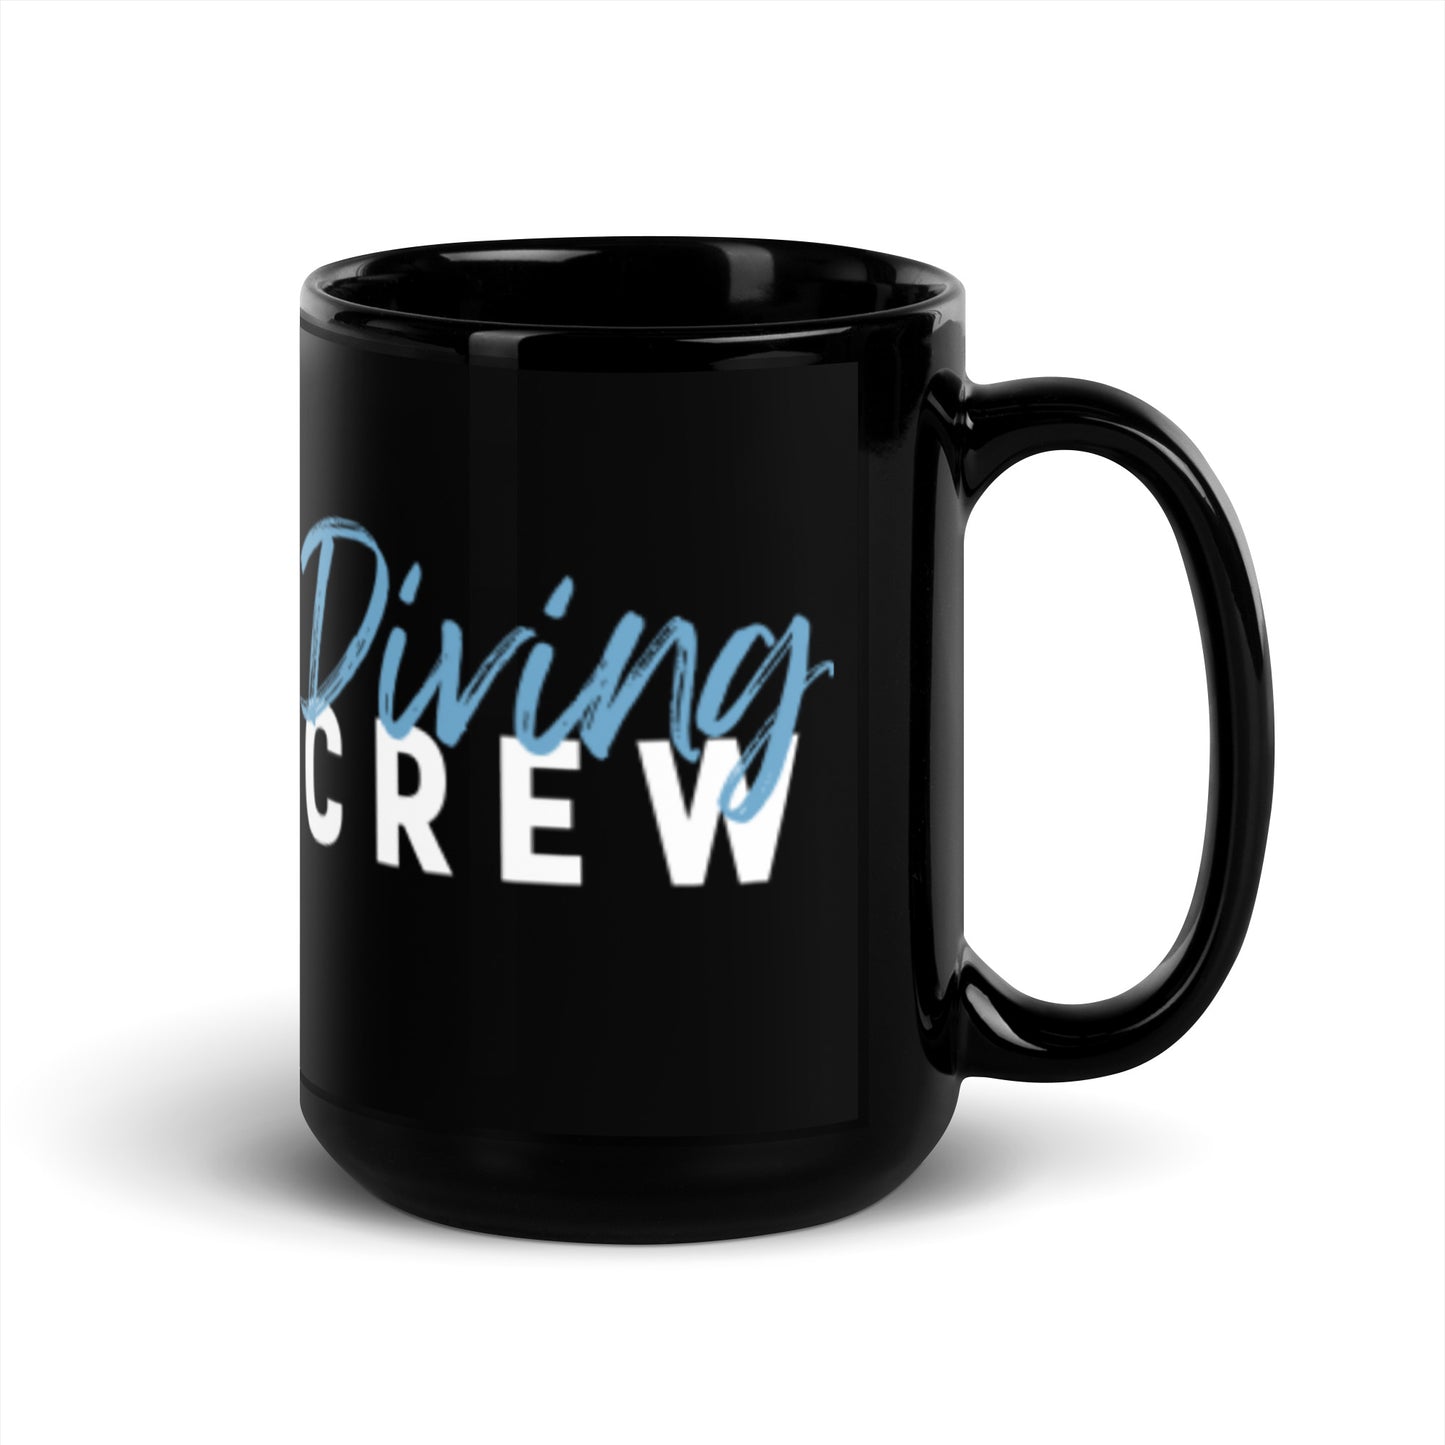 DIVING CREW & SPACESHIP WRECK Black Glossy Mug - The Diving Universe by Kristine Kathryn Rusch